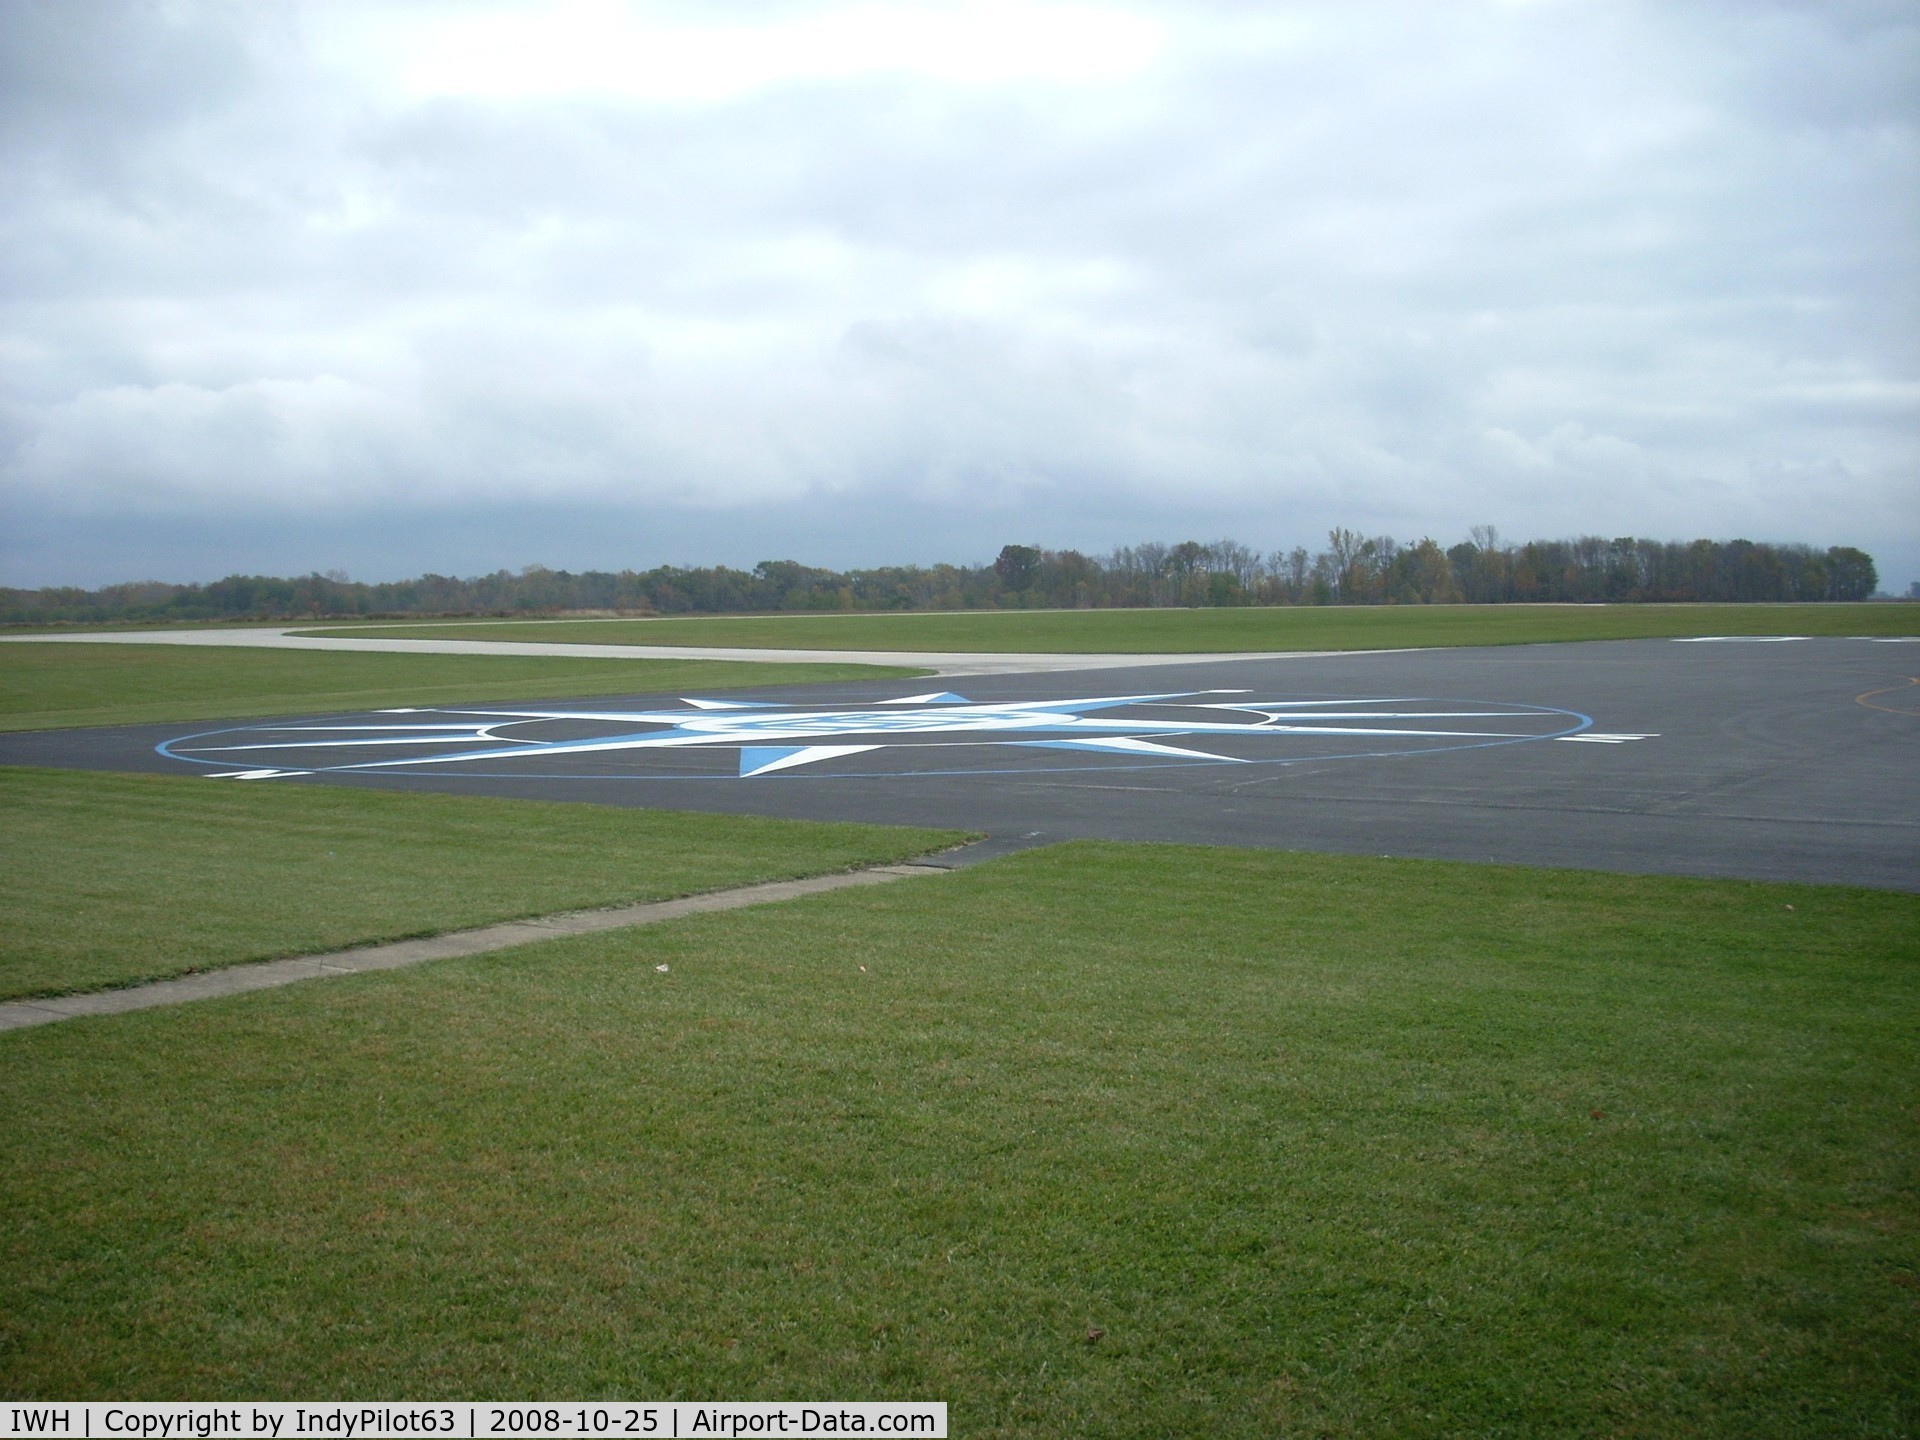 Wabash Municipal Airport (IWH) - Nicely painted compass rose